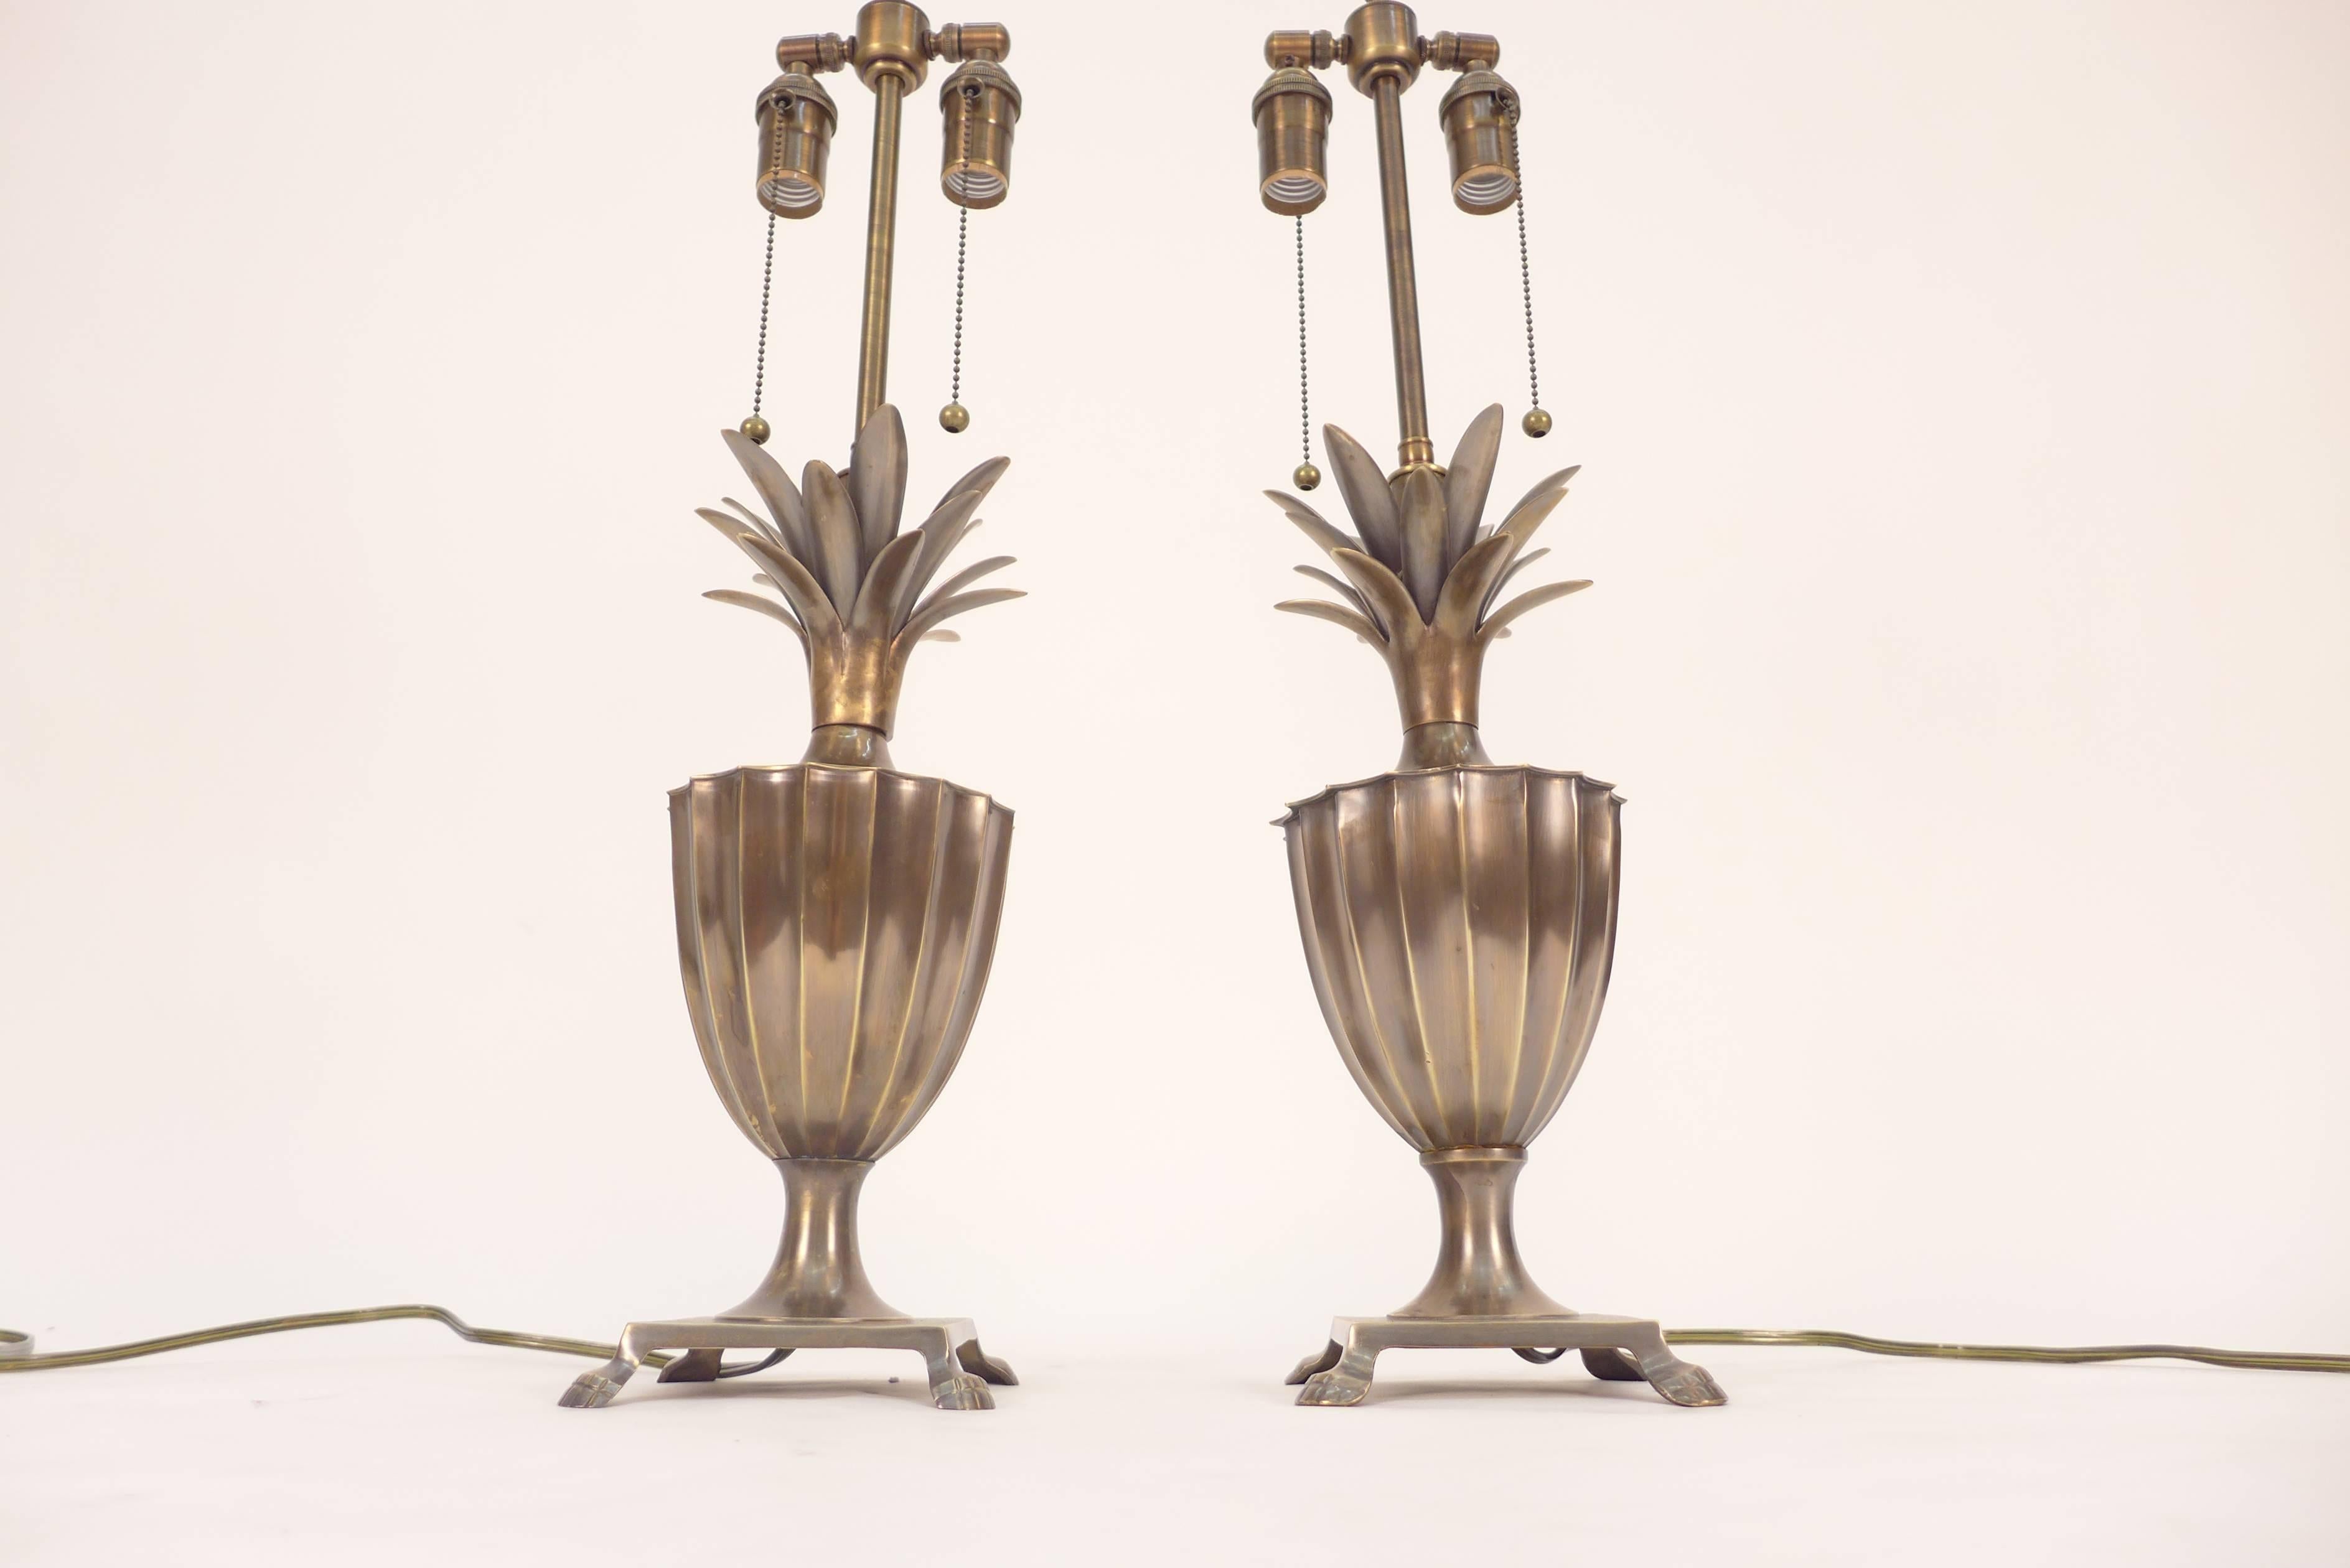 Vintage Hollywood Regency brass pineapple Chapman lamp.
Lamps were rewired with double pull chain sockets.